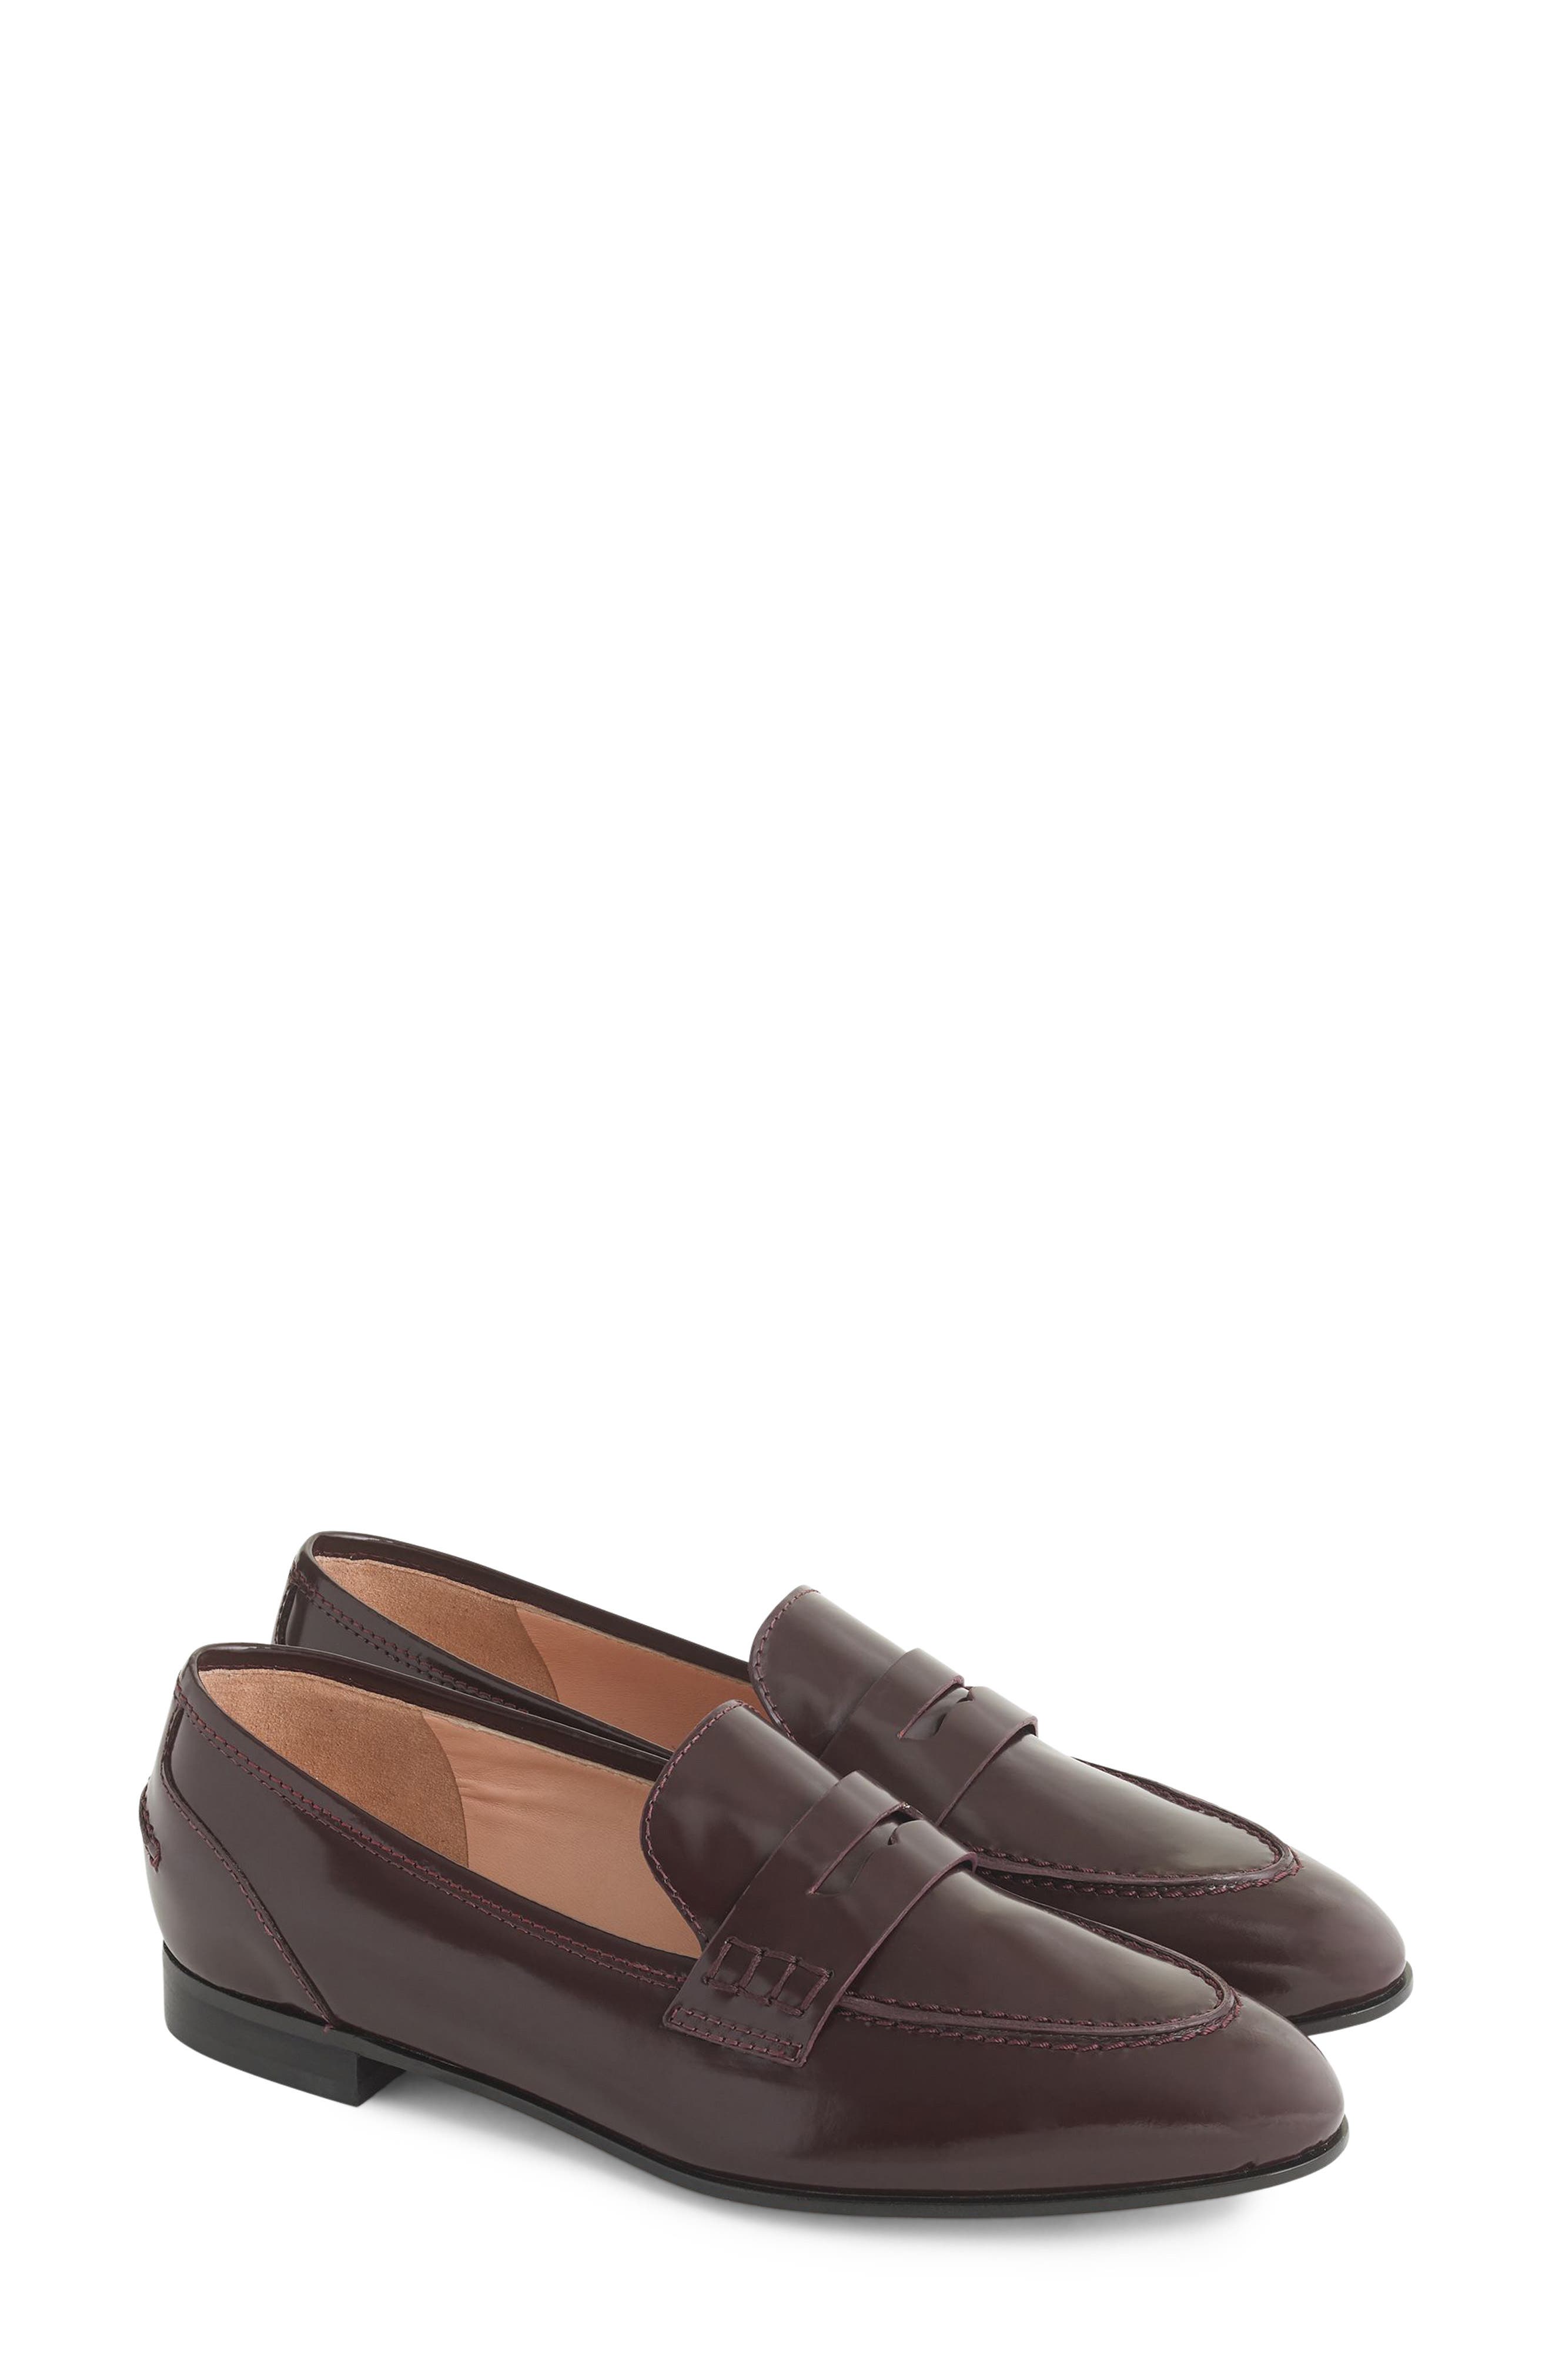 j crew loafers womens